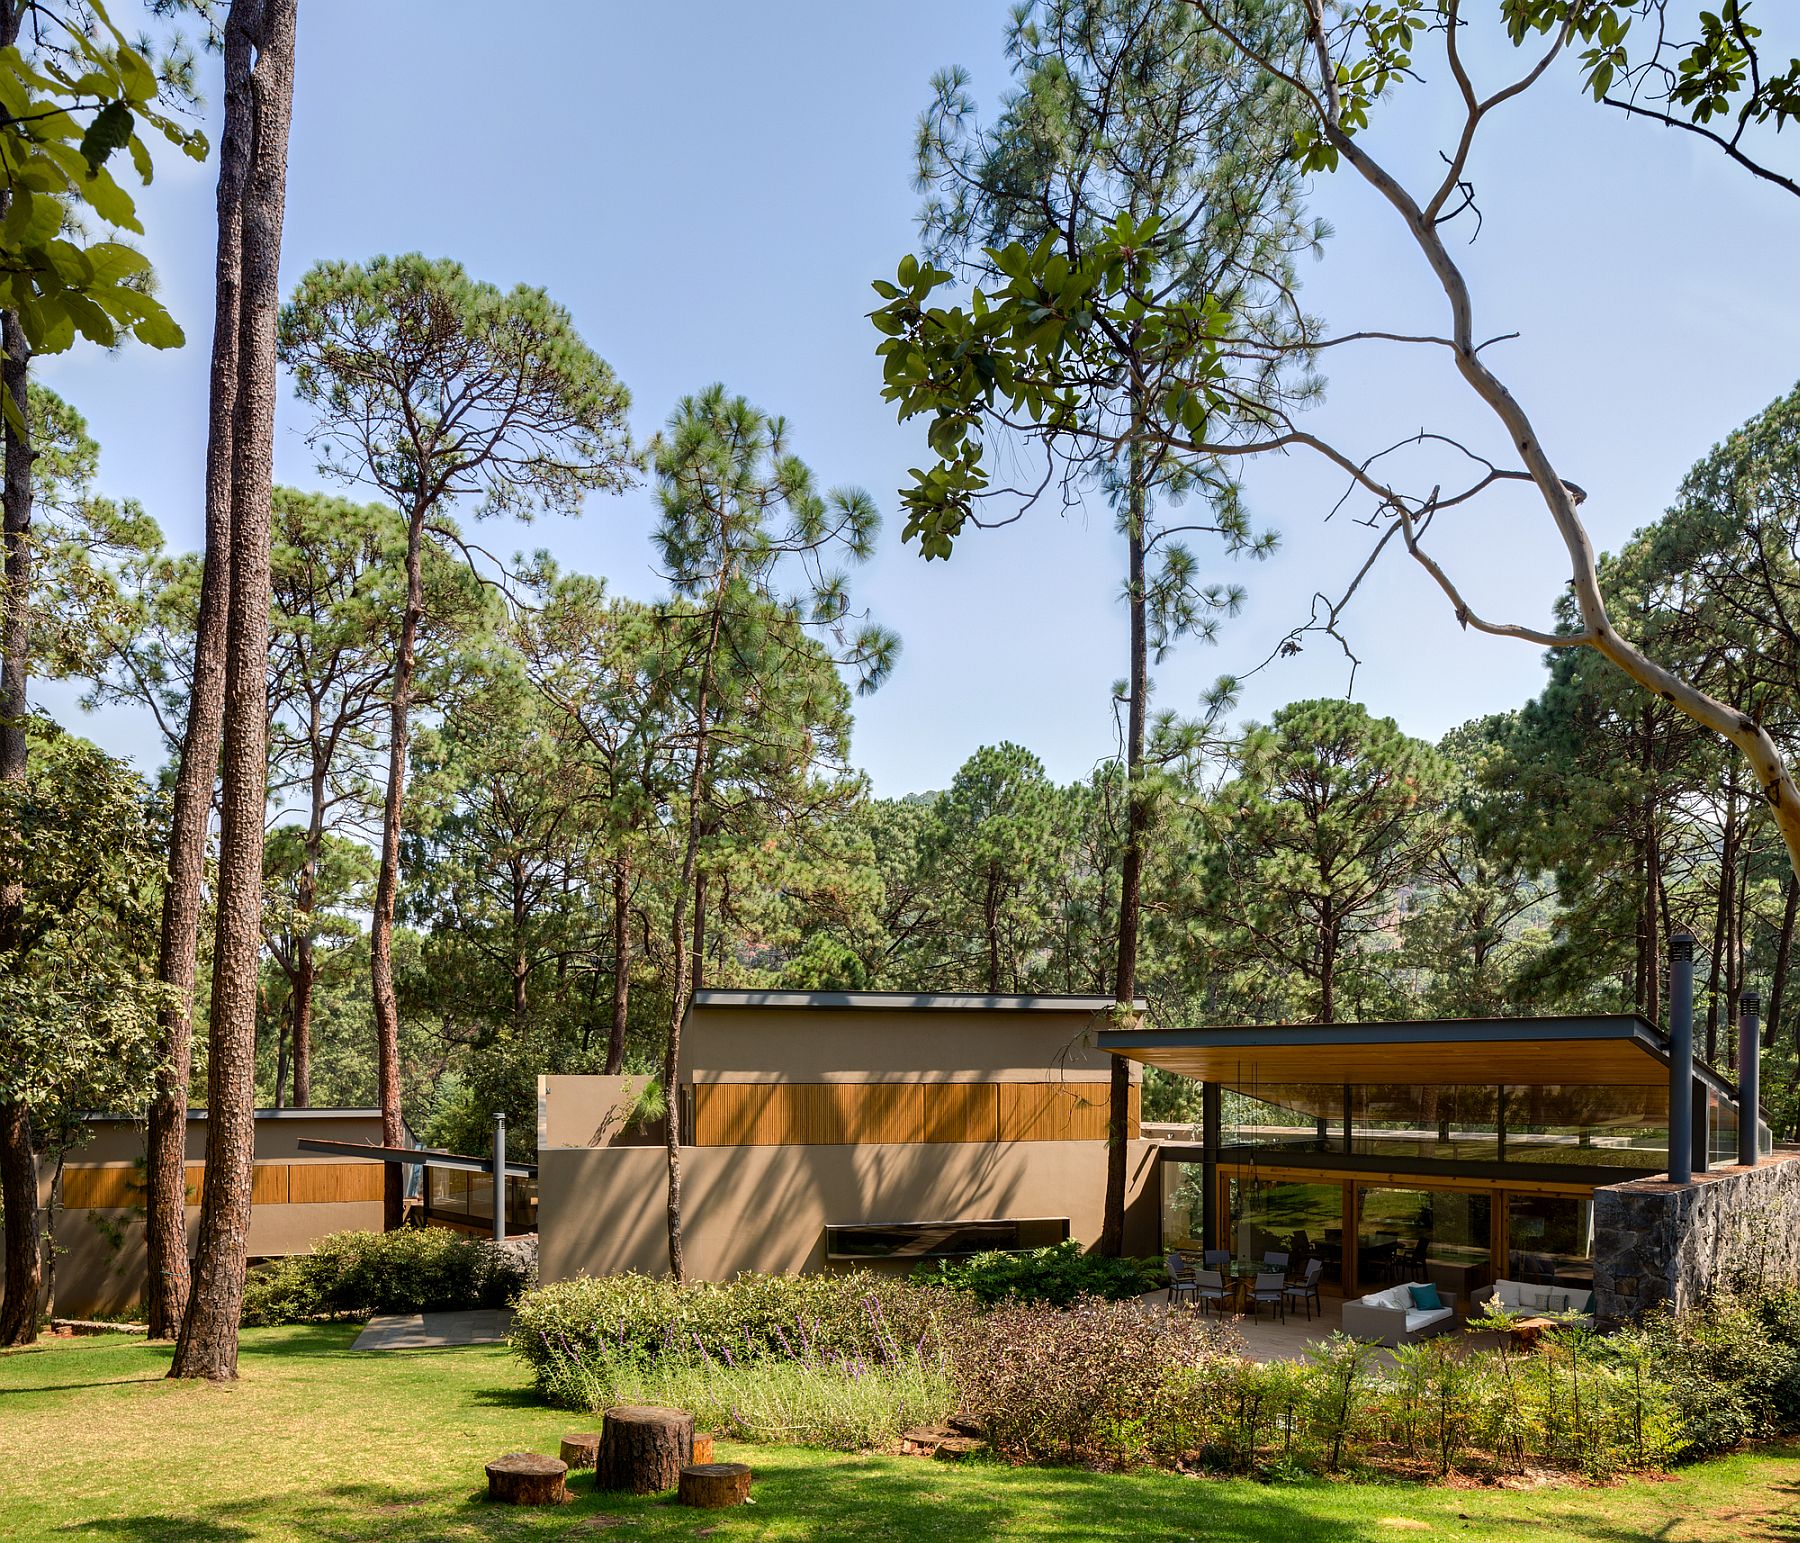 Three individual structures make up the larger house nestled in forest